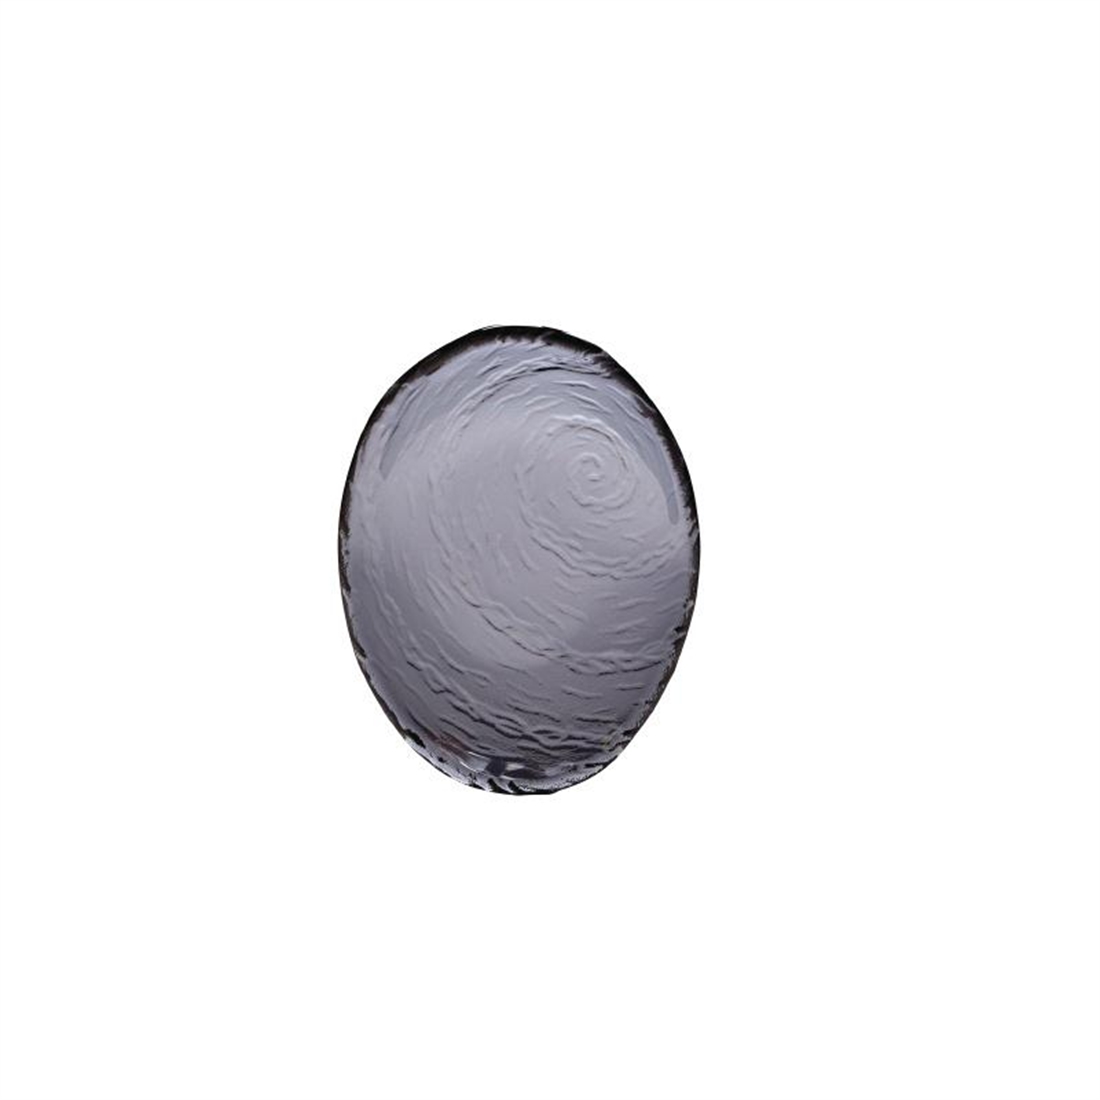 Steelite Scape Glass Smoked Oval Bowls 200mm